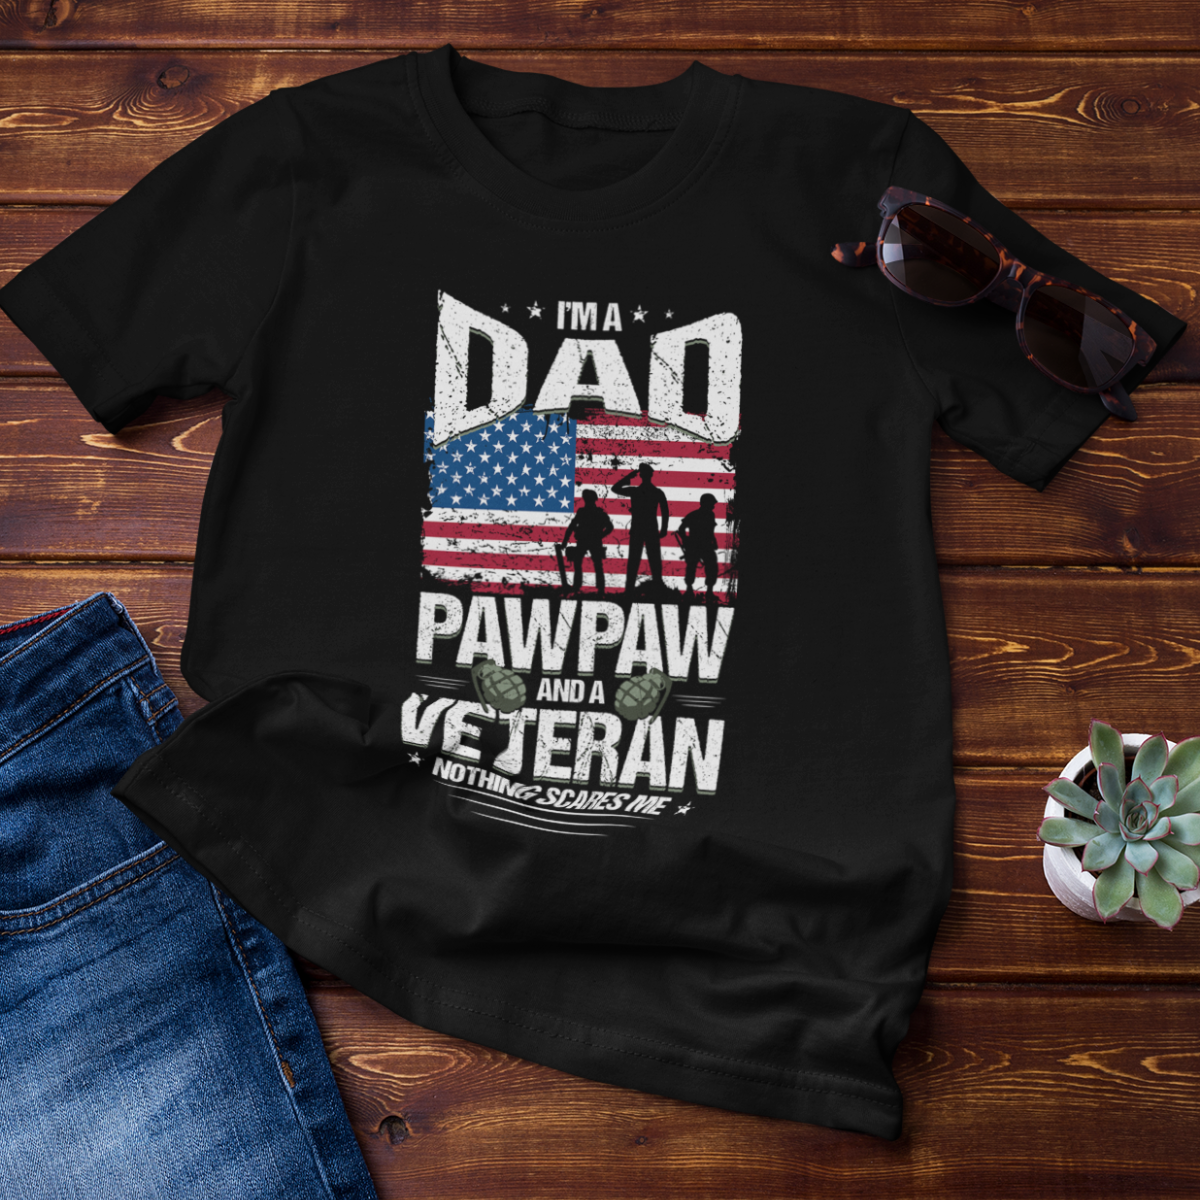 Dad T-shirt - I AM A DAD A PAWPAW AND A VETERAN